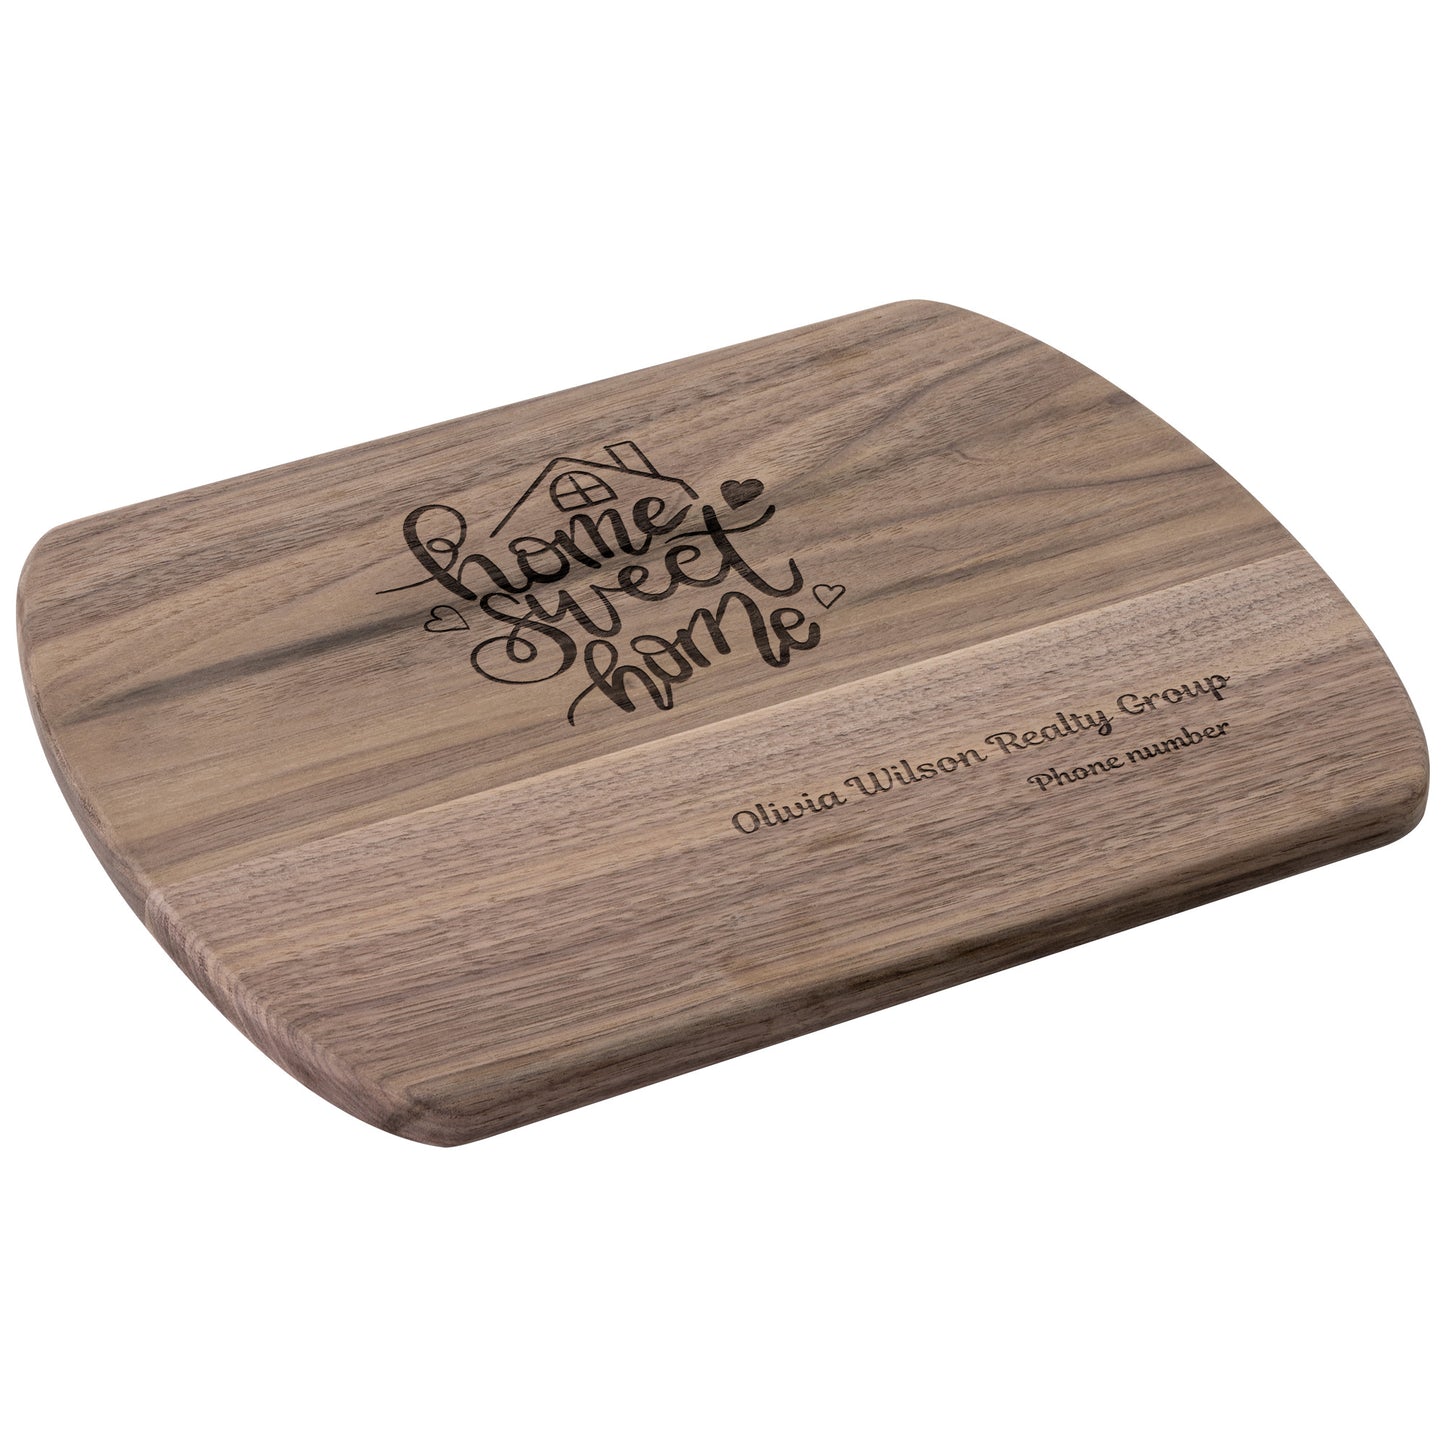 Real Estate Closing Gift, Personalized Cutting Board